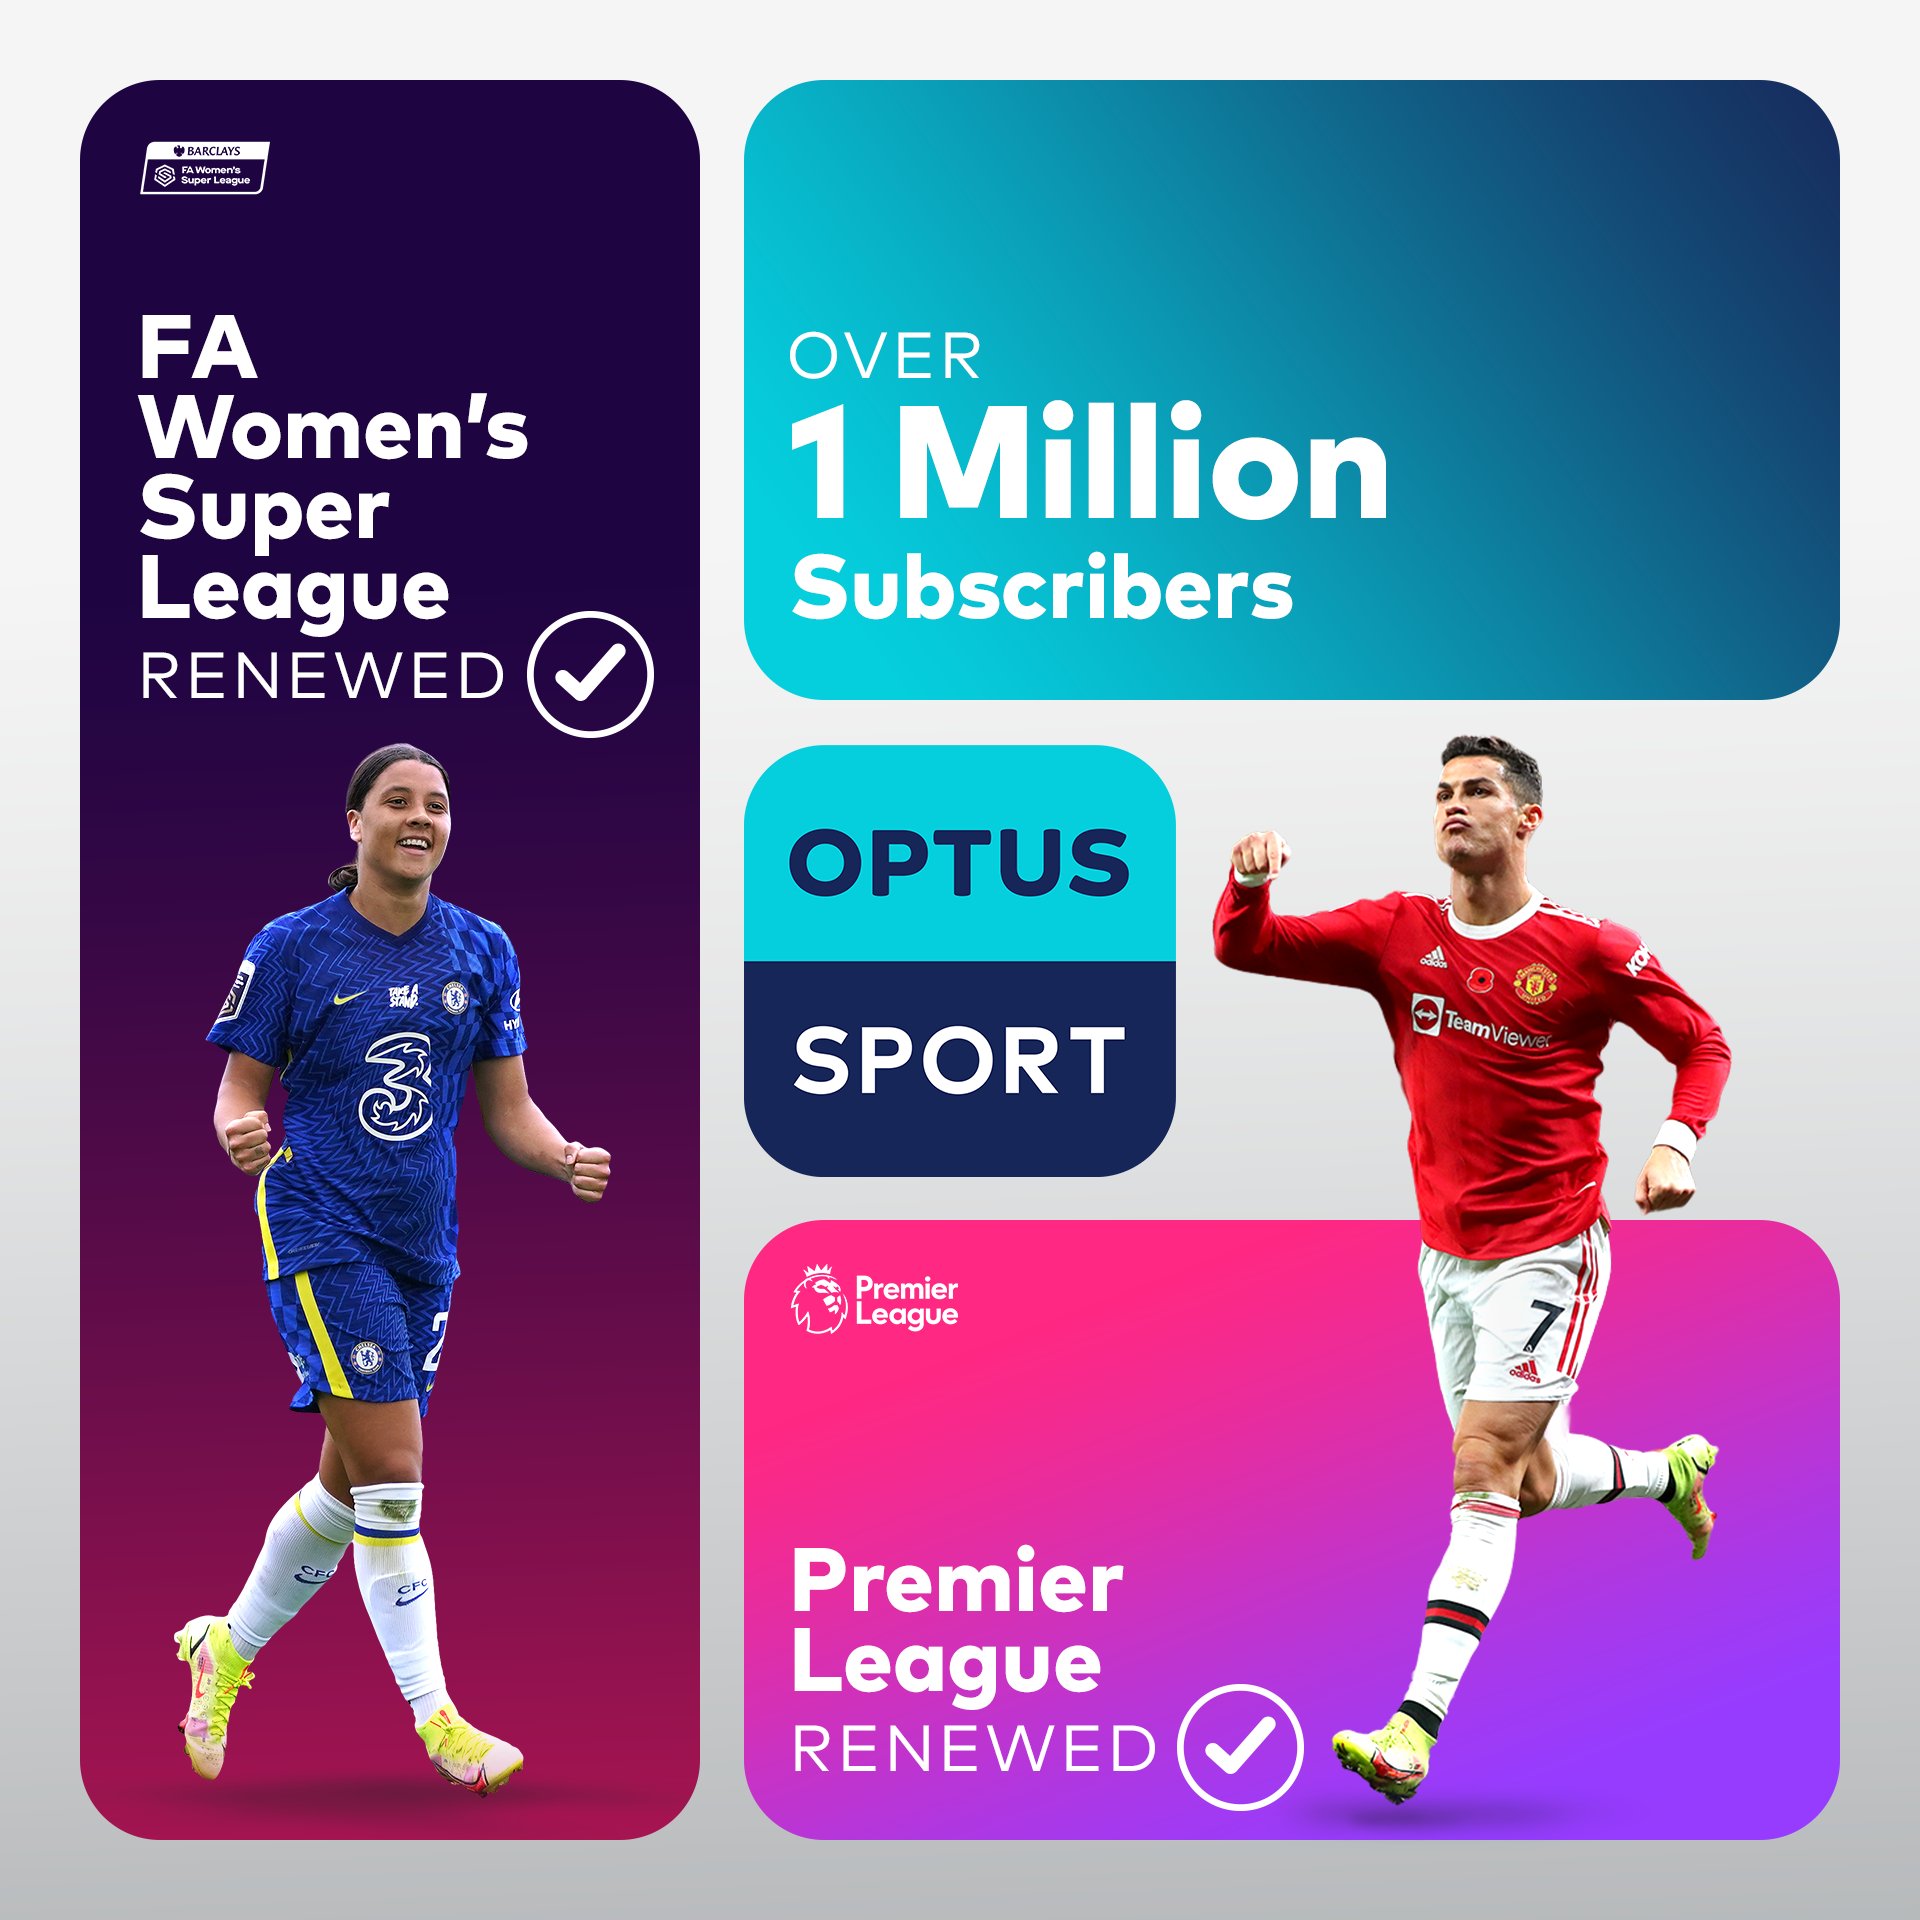 Optus Sport Extends Premier League And Womens Super League Broadcast Deal In Australia Until 2028 And 2024 Respectively